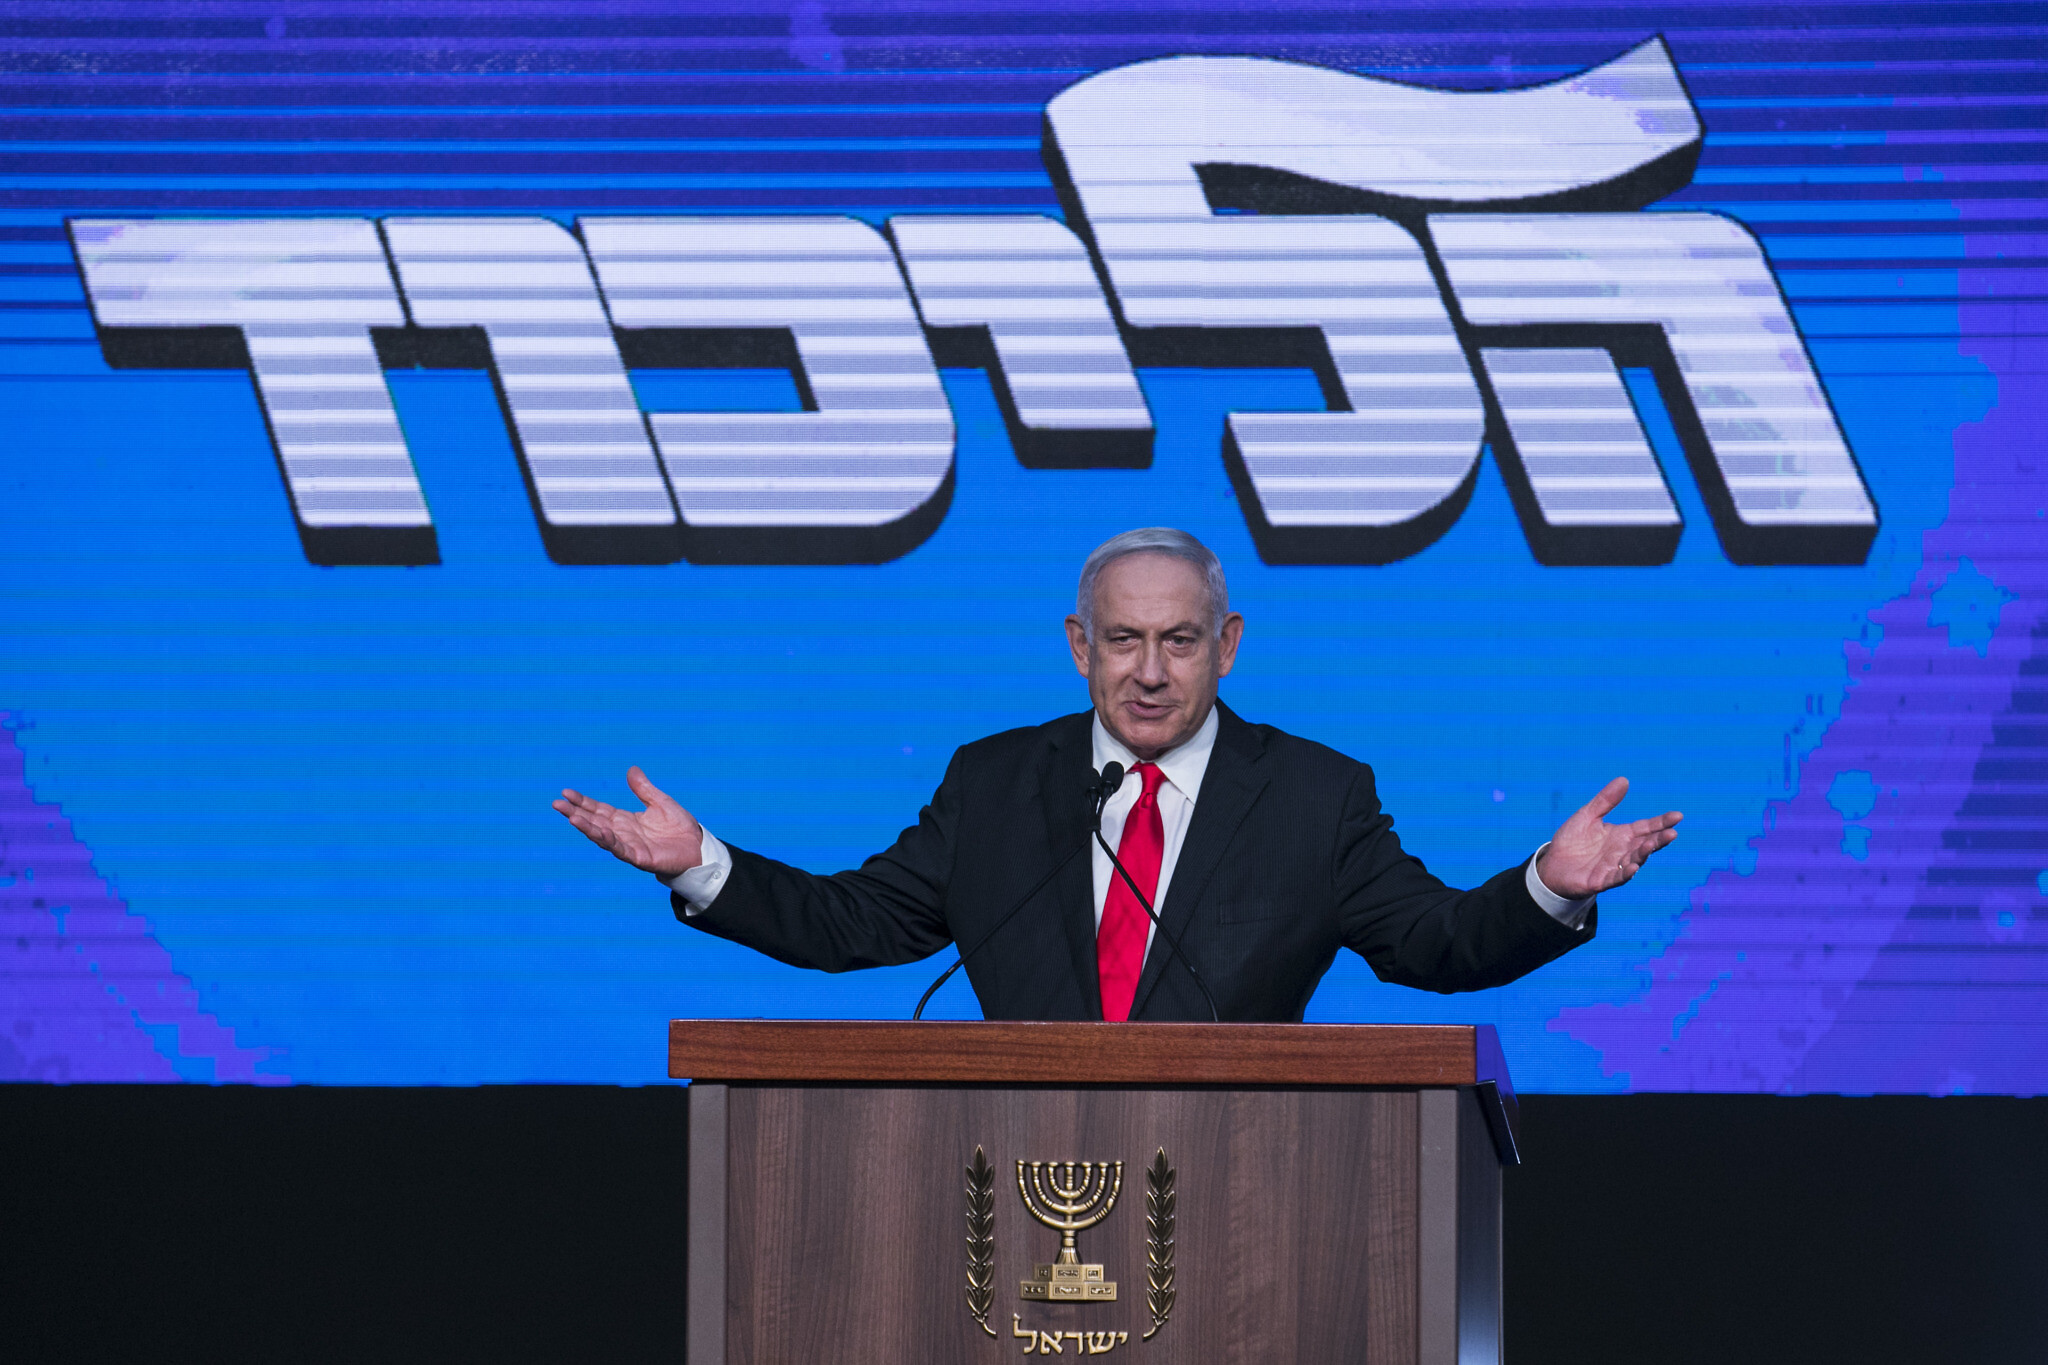 Prime Minister Benjamin Netanyahu addresses his supporters on the night of the Israeli elections, at a Likud party event in Jerusalem, in the early hours of March 24, 2021. (Olivier Fitoussi/Flash90)